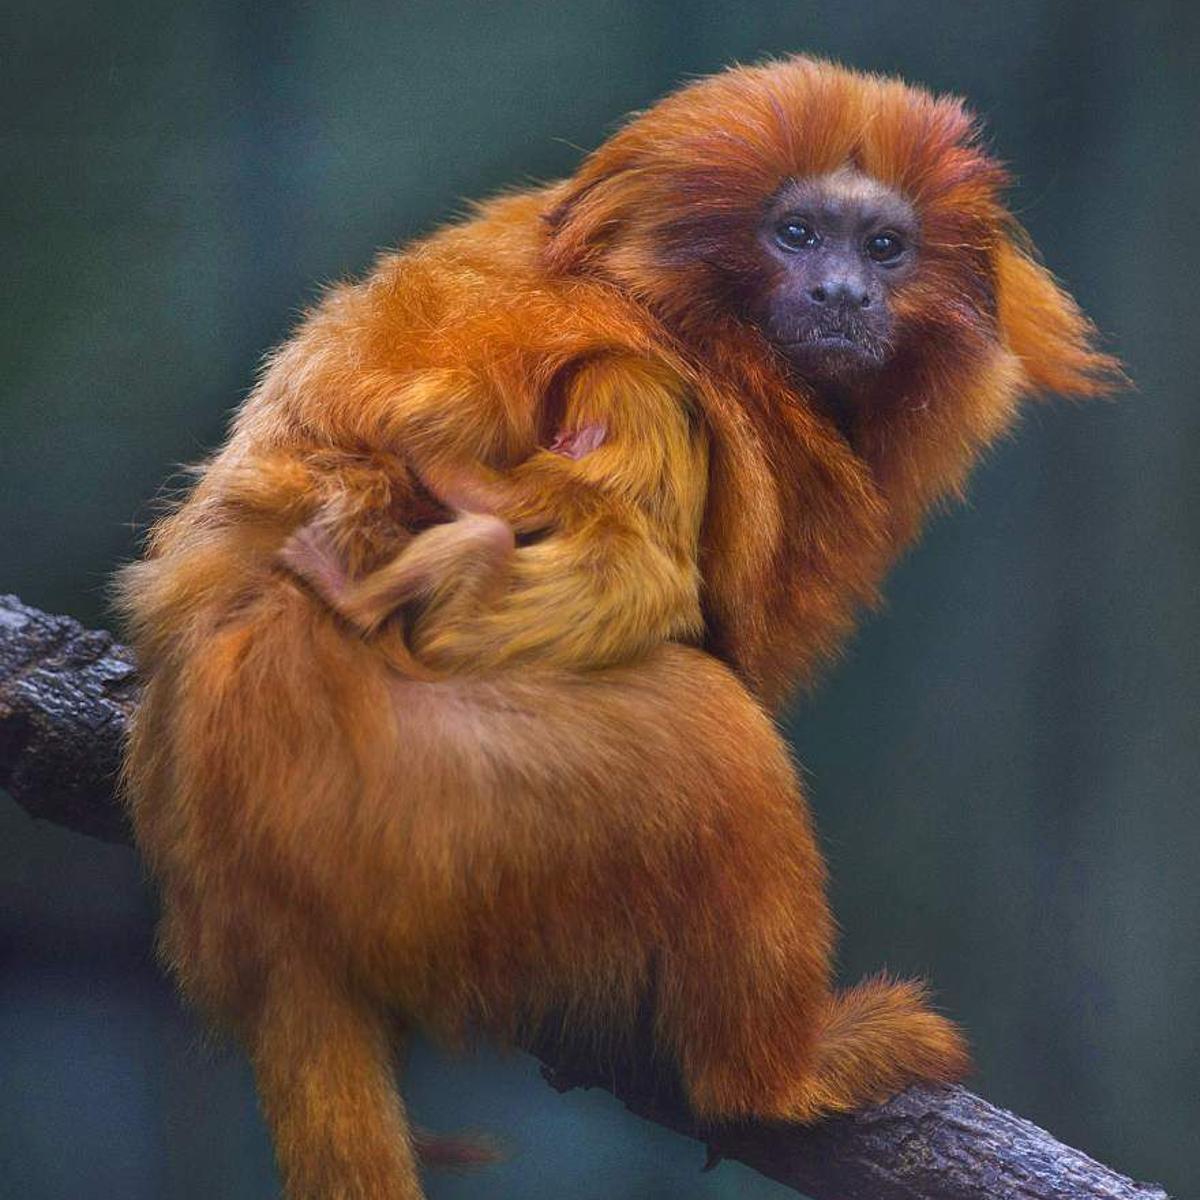 Baton Rouge Zoo welcomes new baby golden lion tamarin; monkey species is  endangered | News 